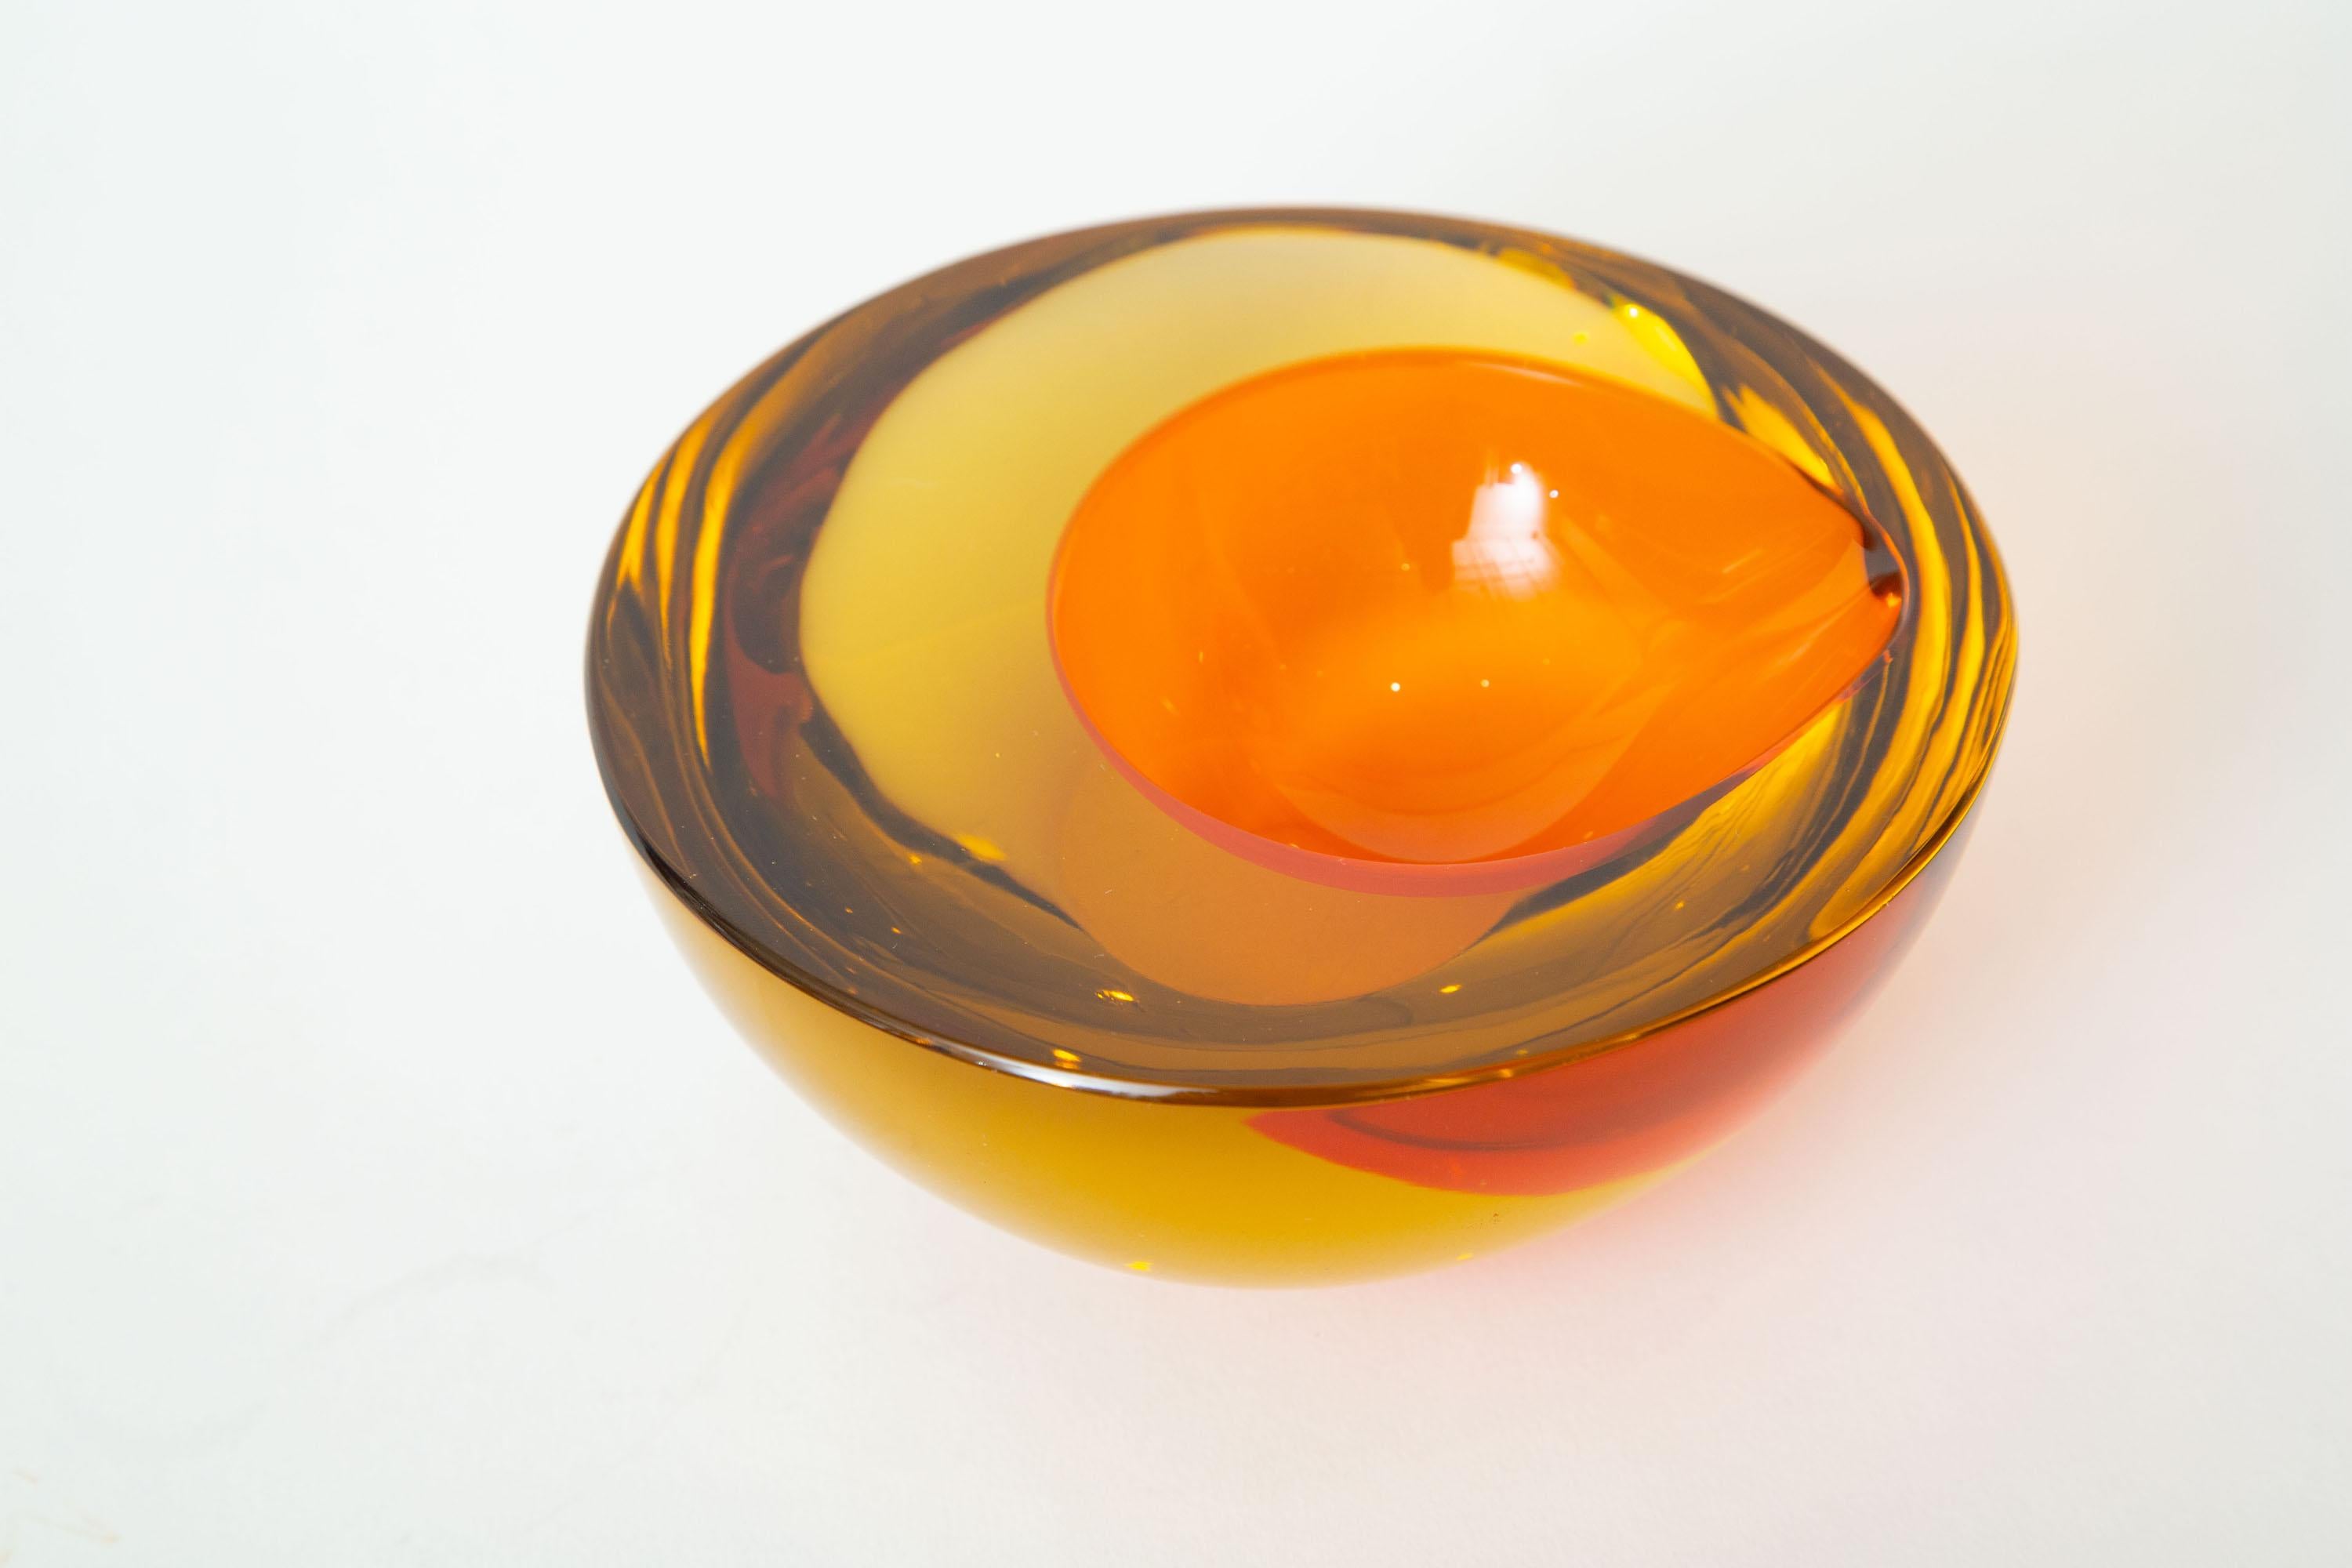 This thick and fabulous vintage Murano orange and yellow amber glass geode bowl is the work of Allessandro Mandruzzato. It is almost like an orange egg lies in the center. It is Sommerso glass. From the 1970s. Could be used as a decorative bowl or